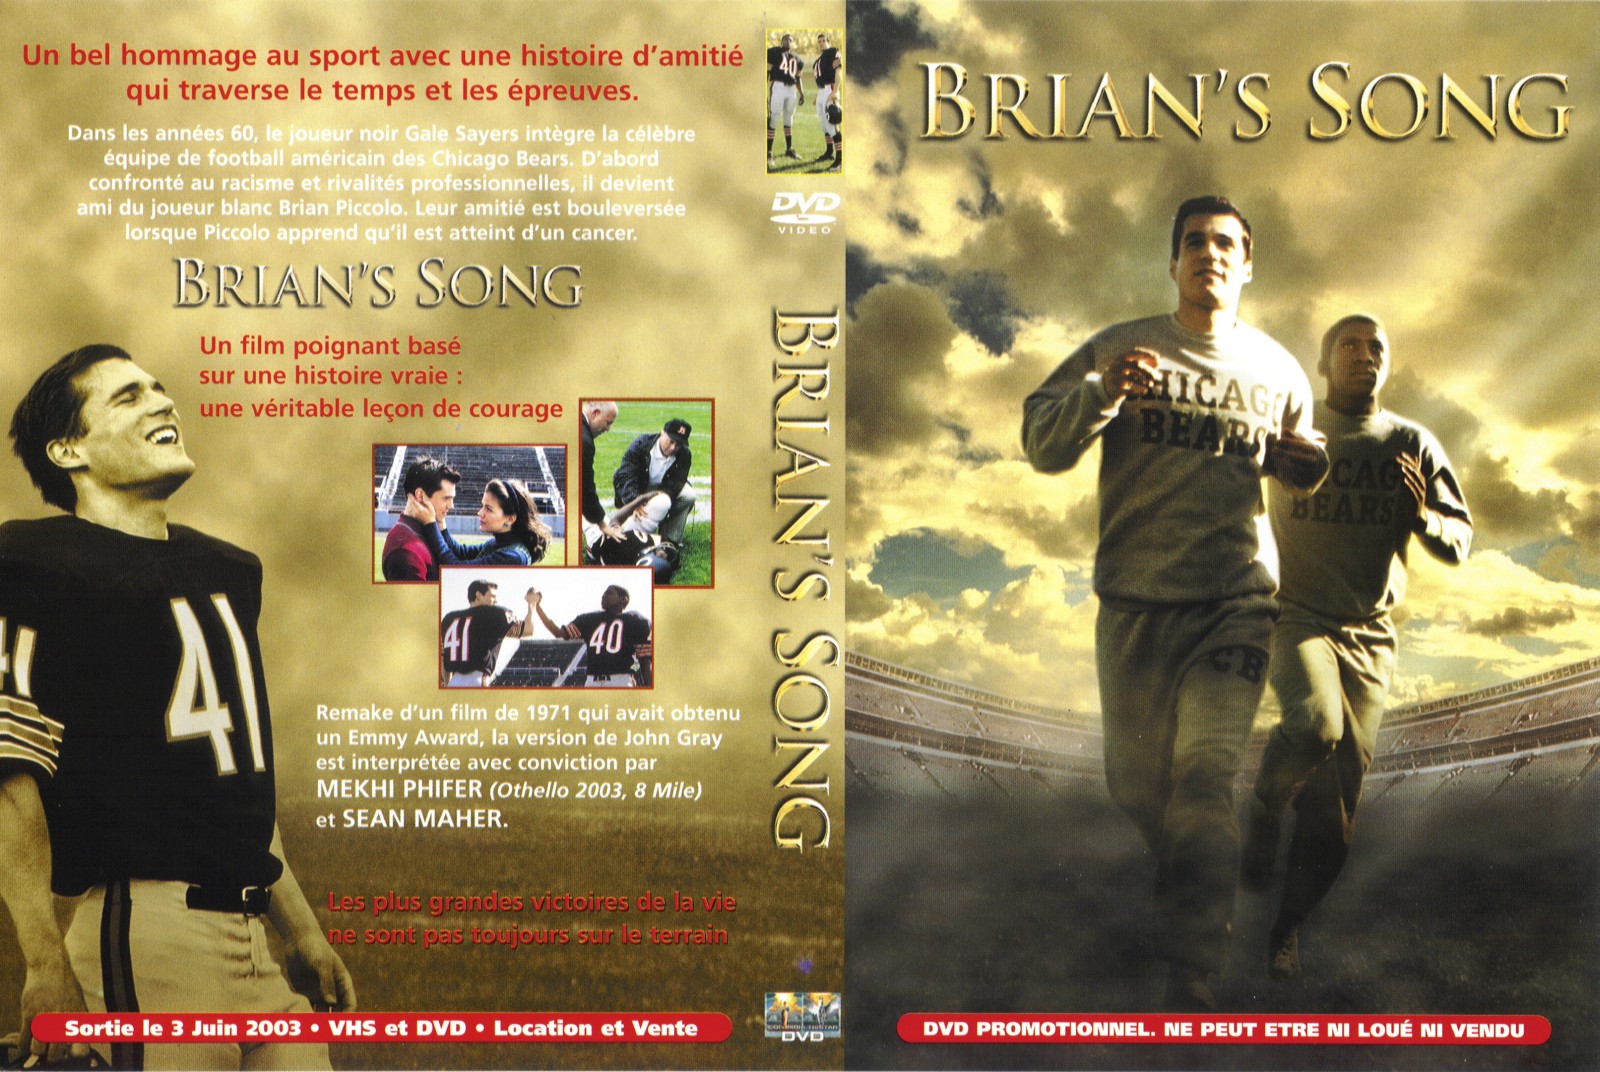 Jaquette DVD Brian song